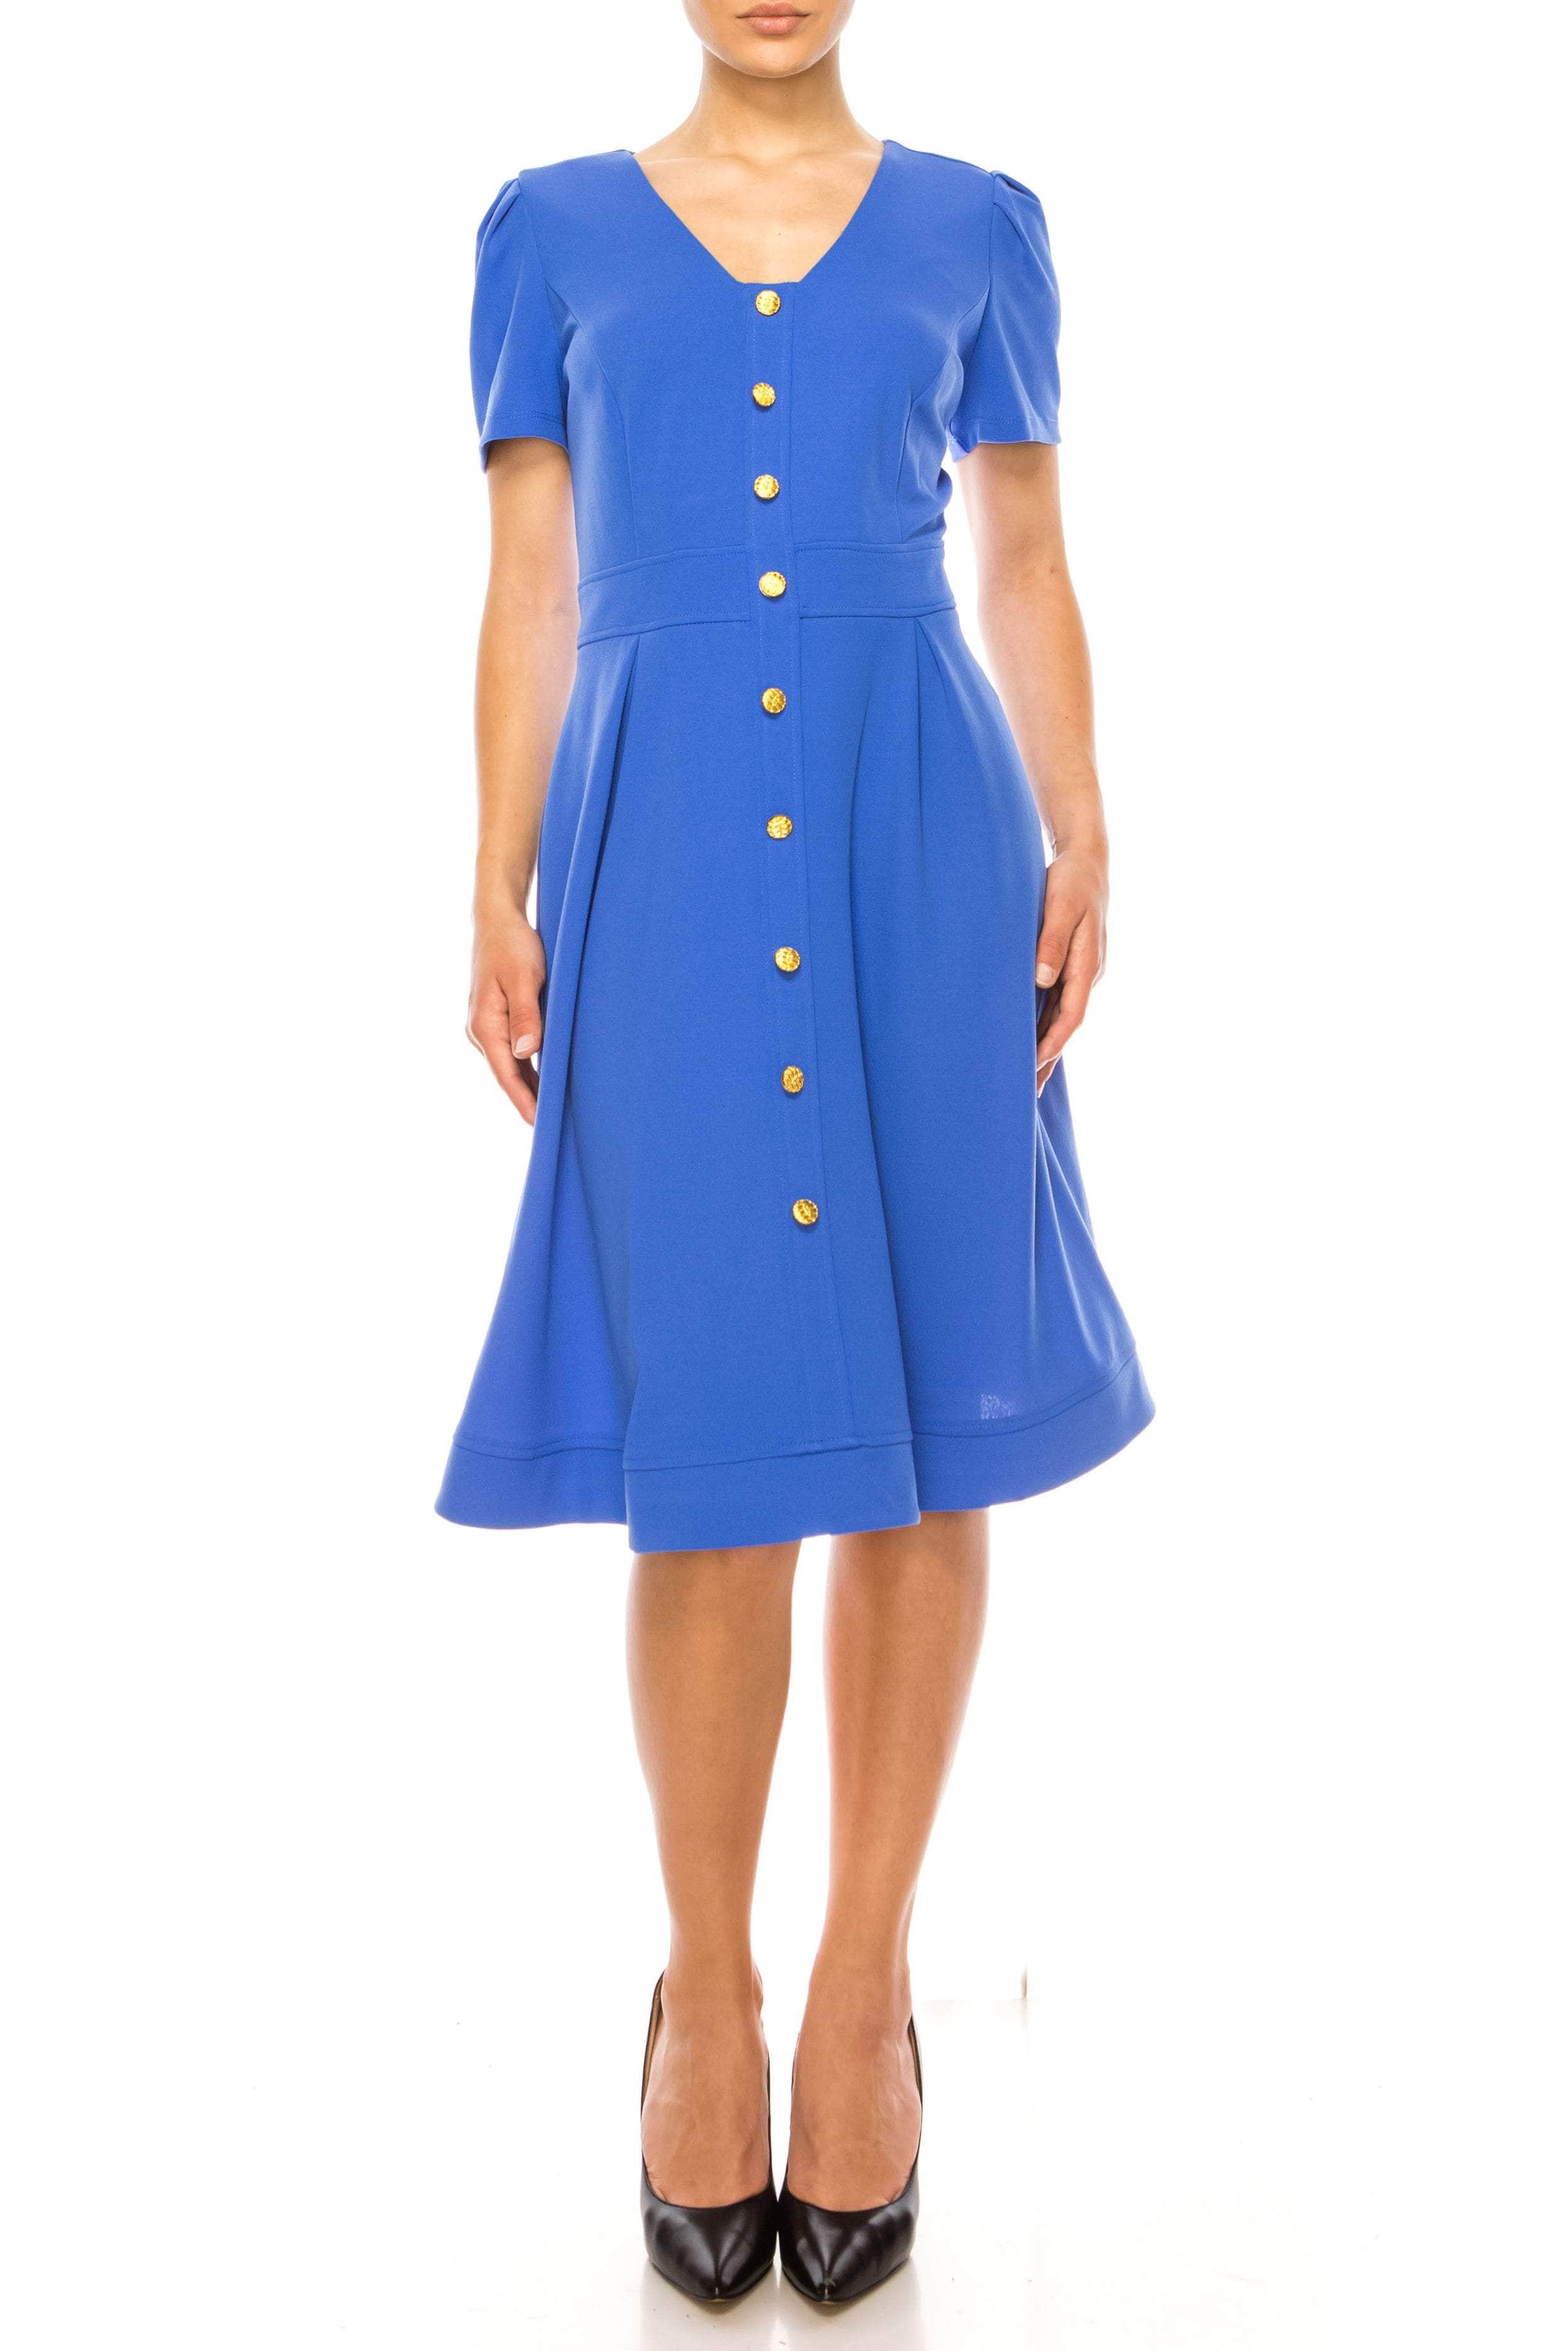 Image of Shelby & Palmer A3121 - Short Sleeve Buttoned Dress